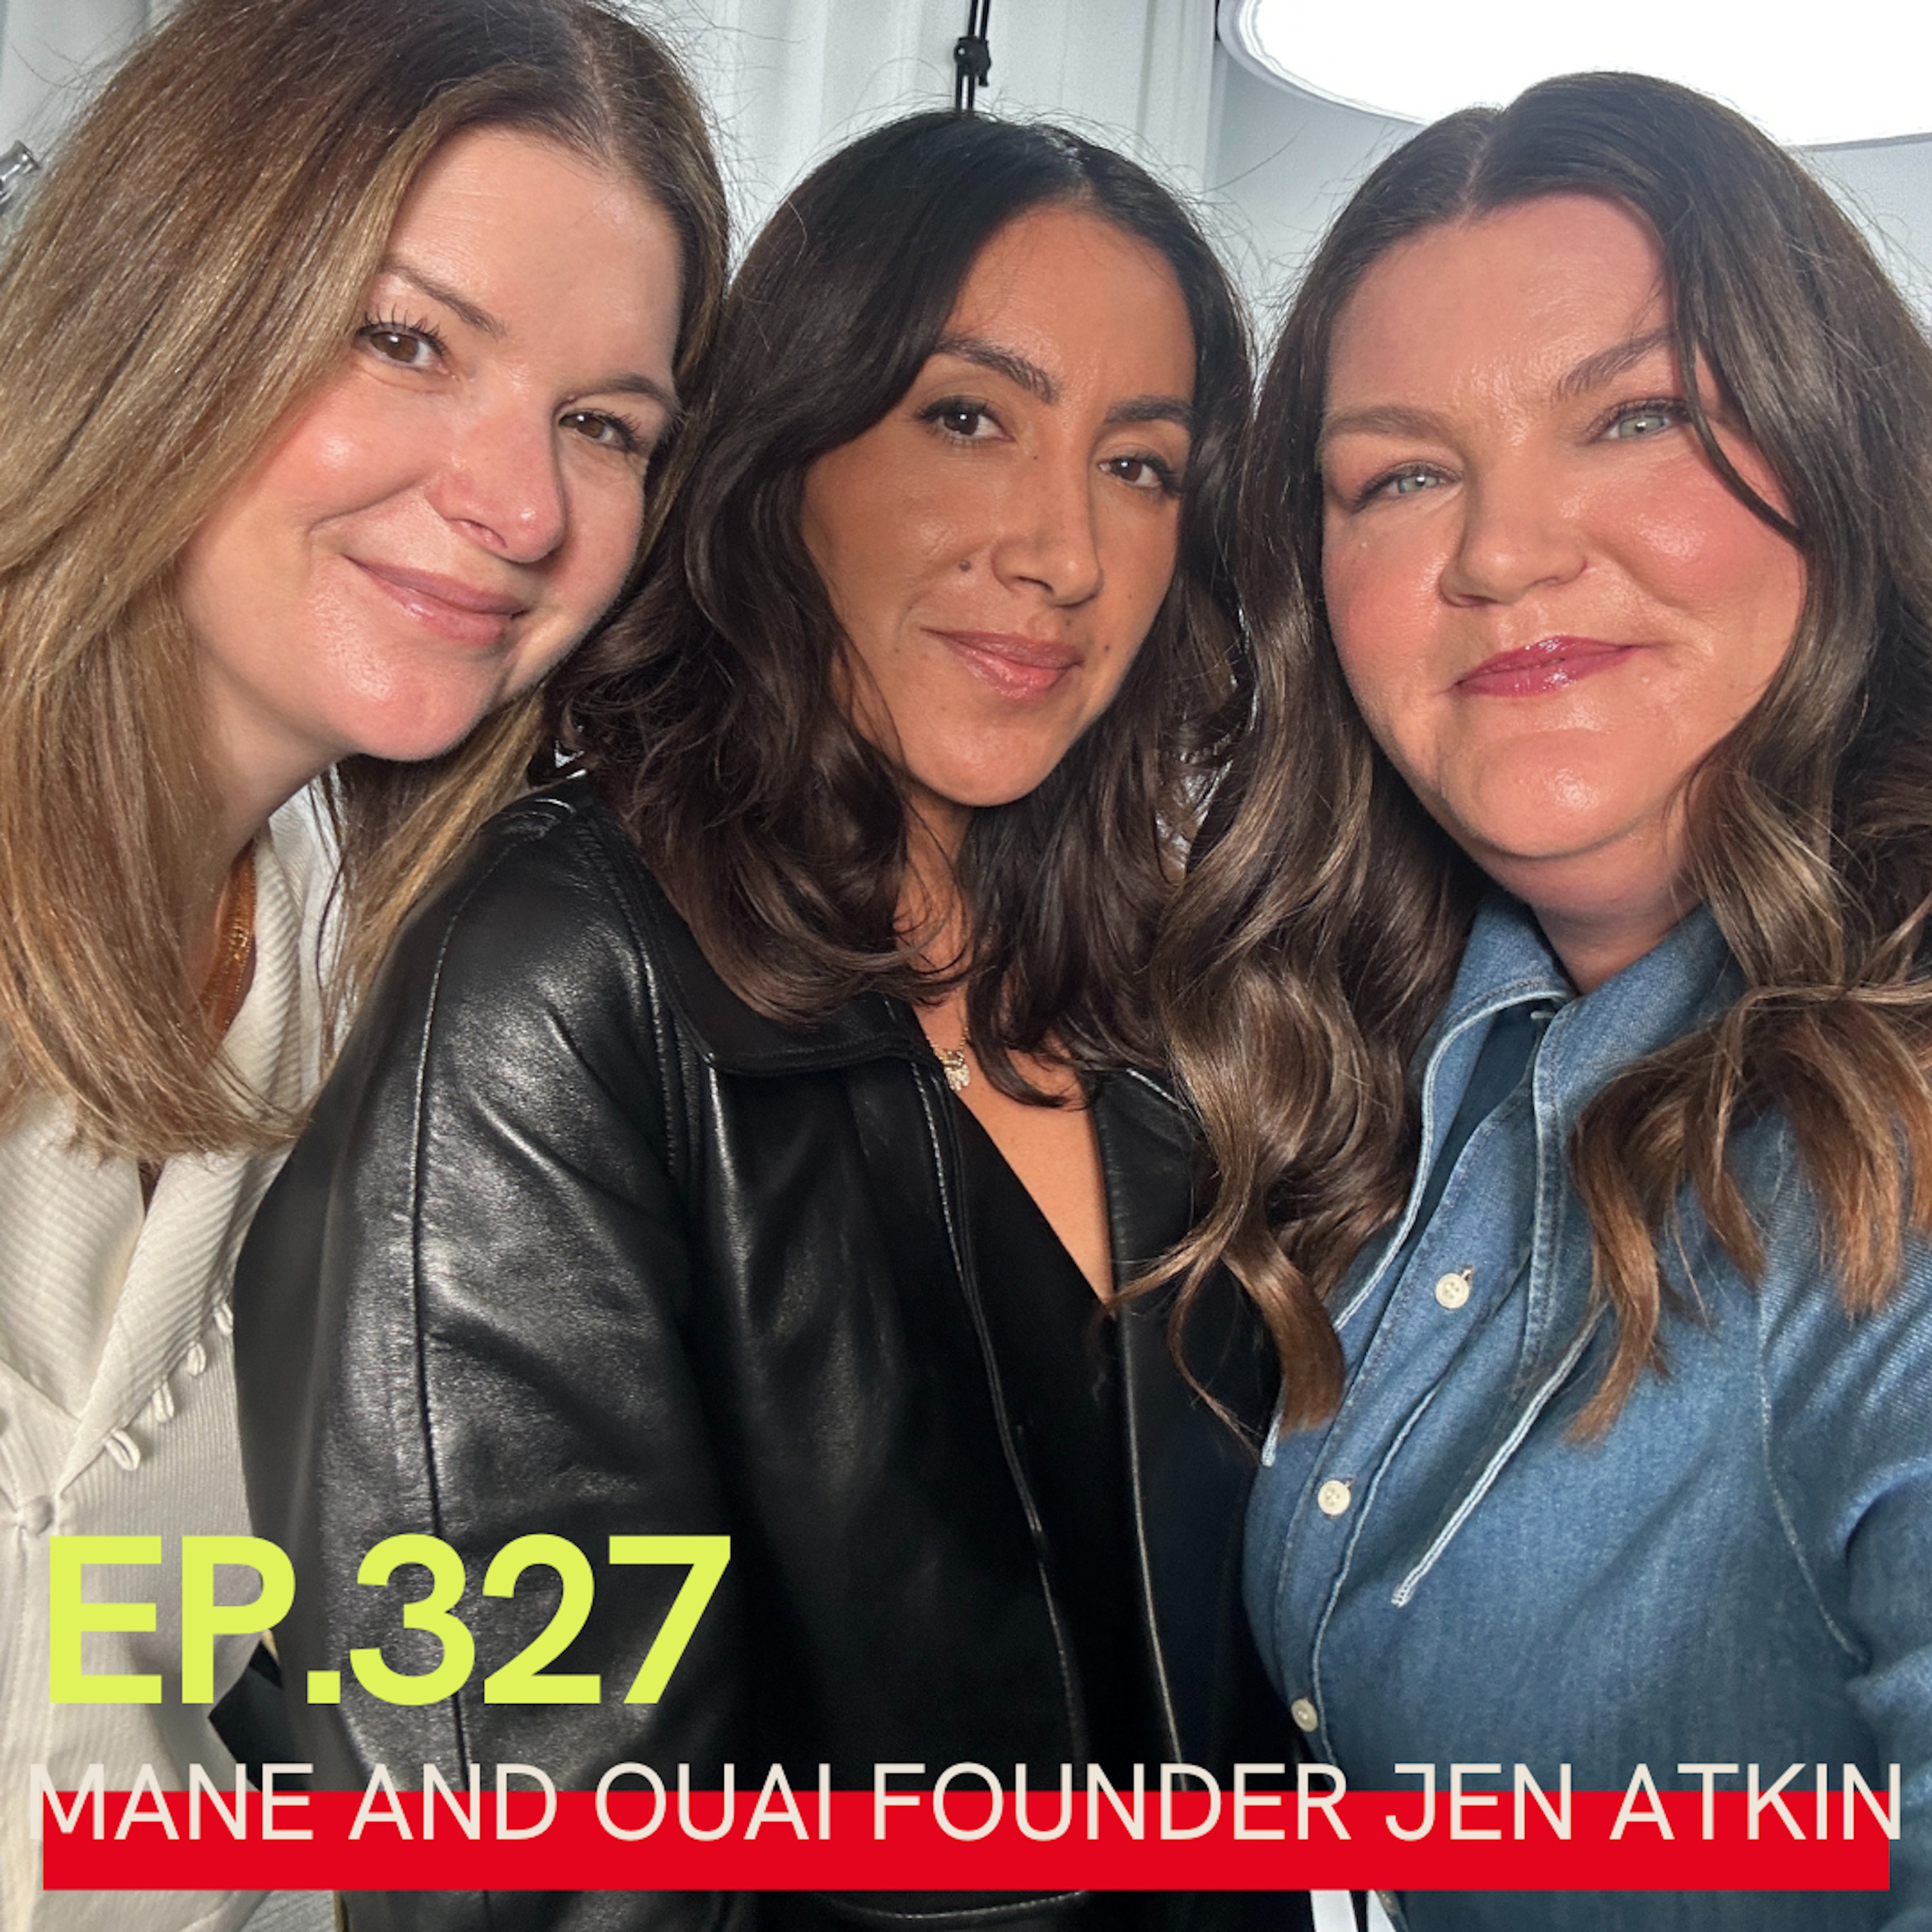 Legendary Hairstylist and Mane Founder Jen Atkin On The One Hair Tool That Got Her Celebrity Friends Buzzing, Pro Tips For Styling Curls That Last and Why It’s High Time We Retire Trends